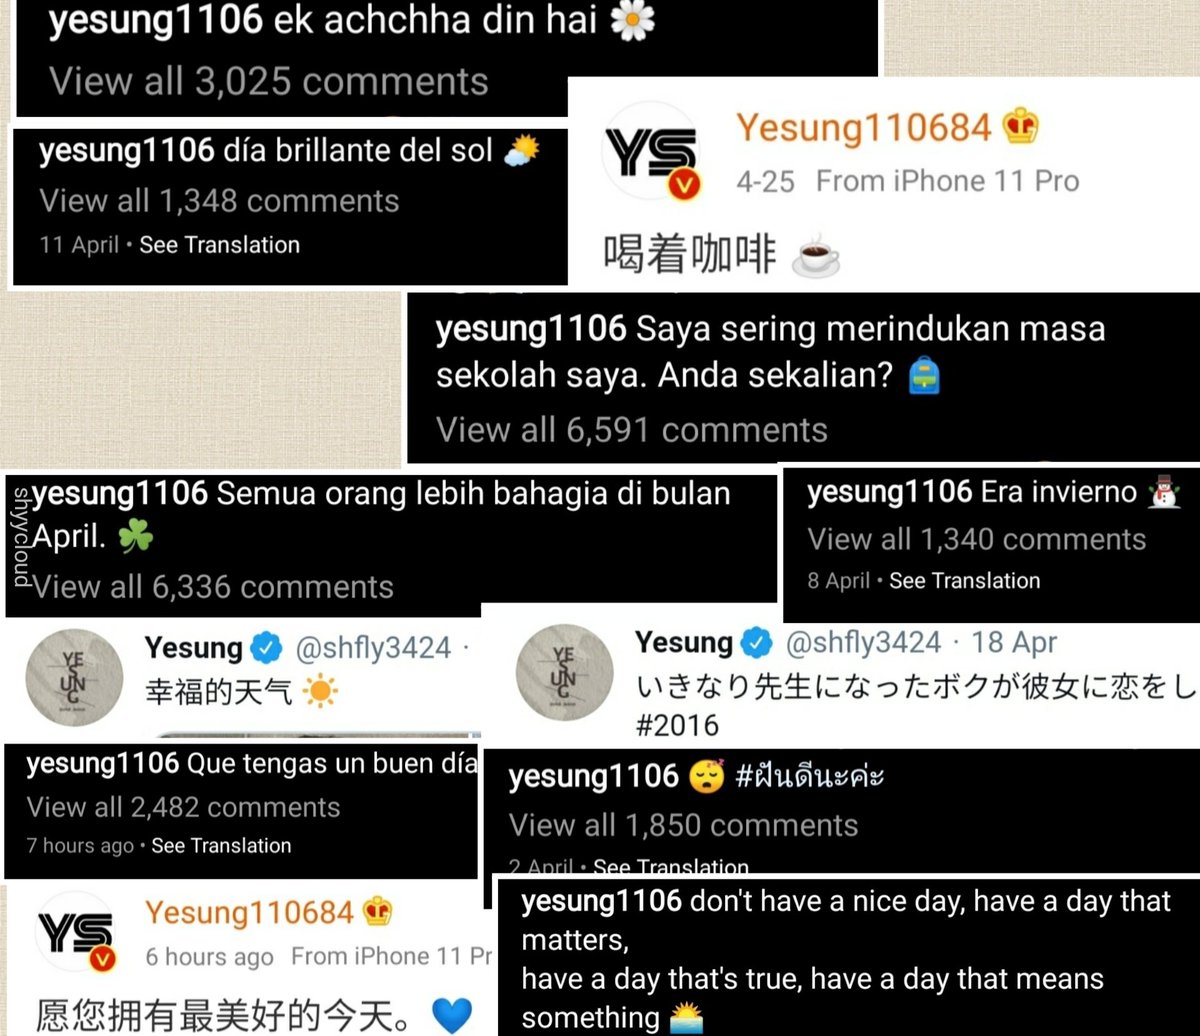 Yesung tries his best to communicate with International elfs daily through all his SNS accounts 